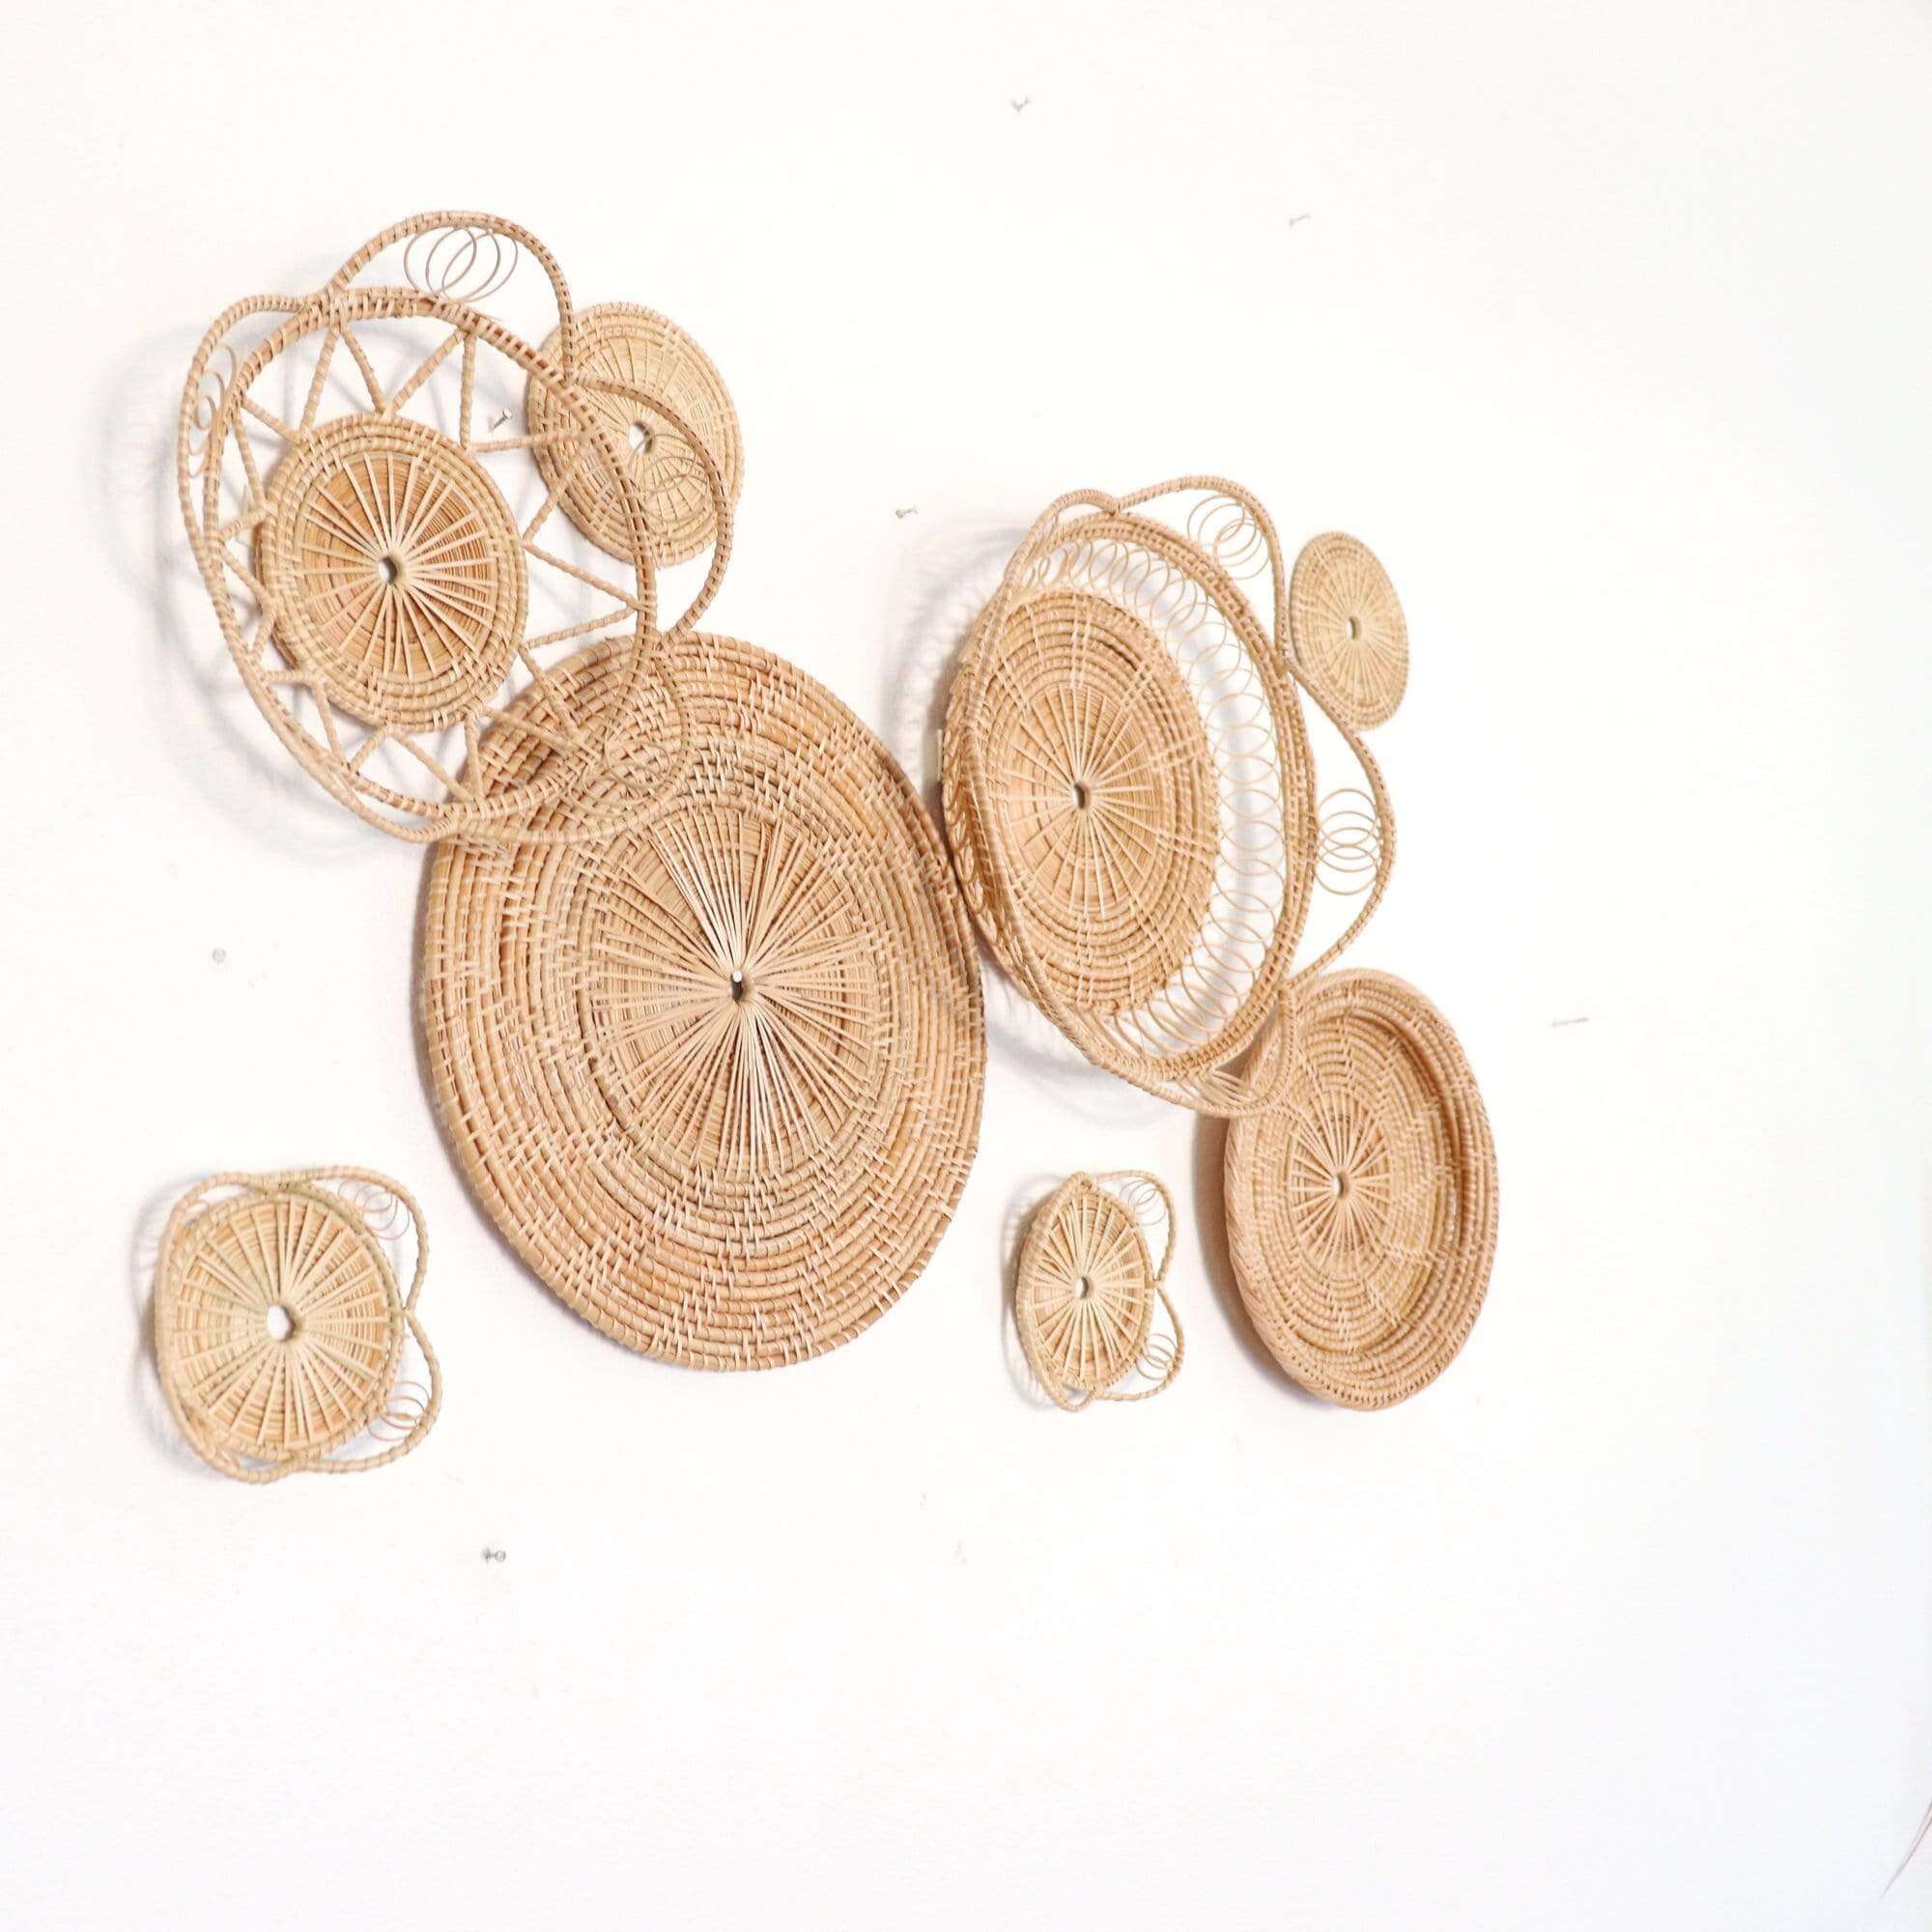 Hom - Rattan Wall Art DeCor Hanging (Set Of 8) By Thaihome